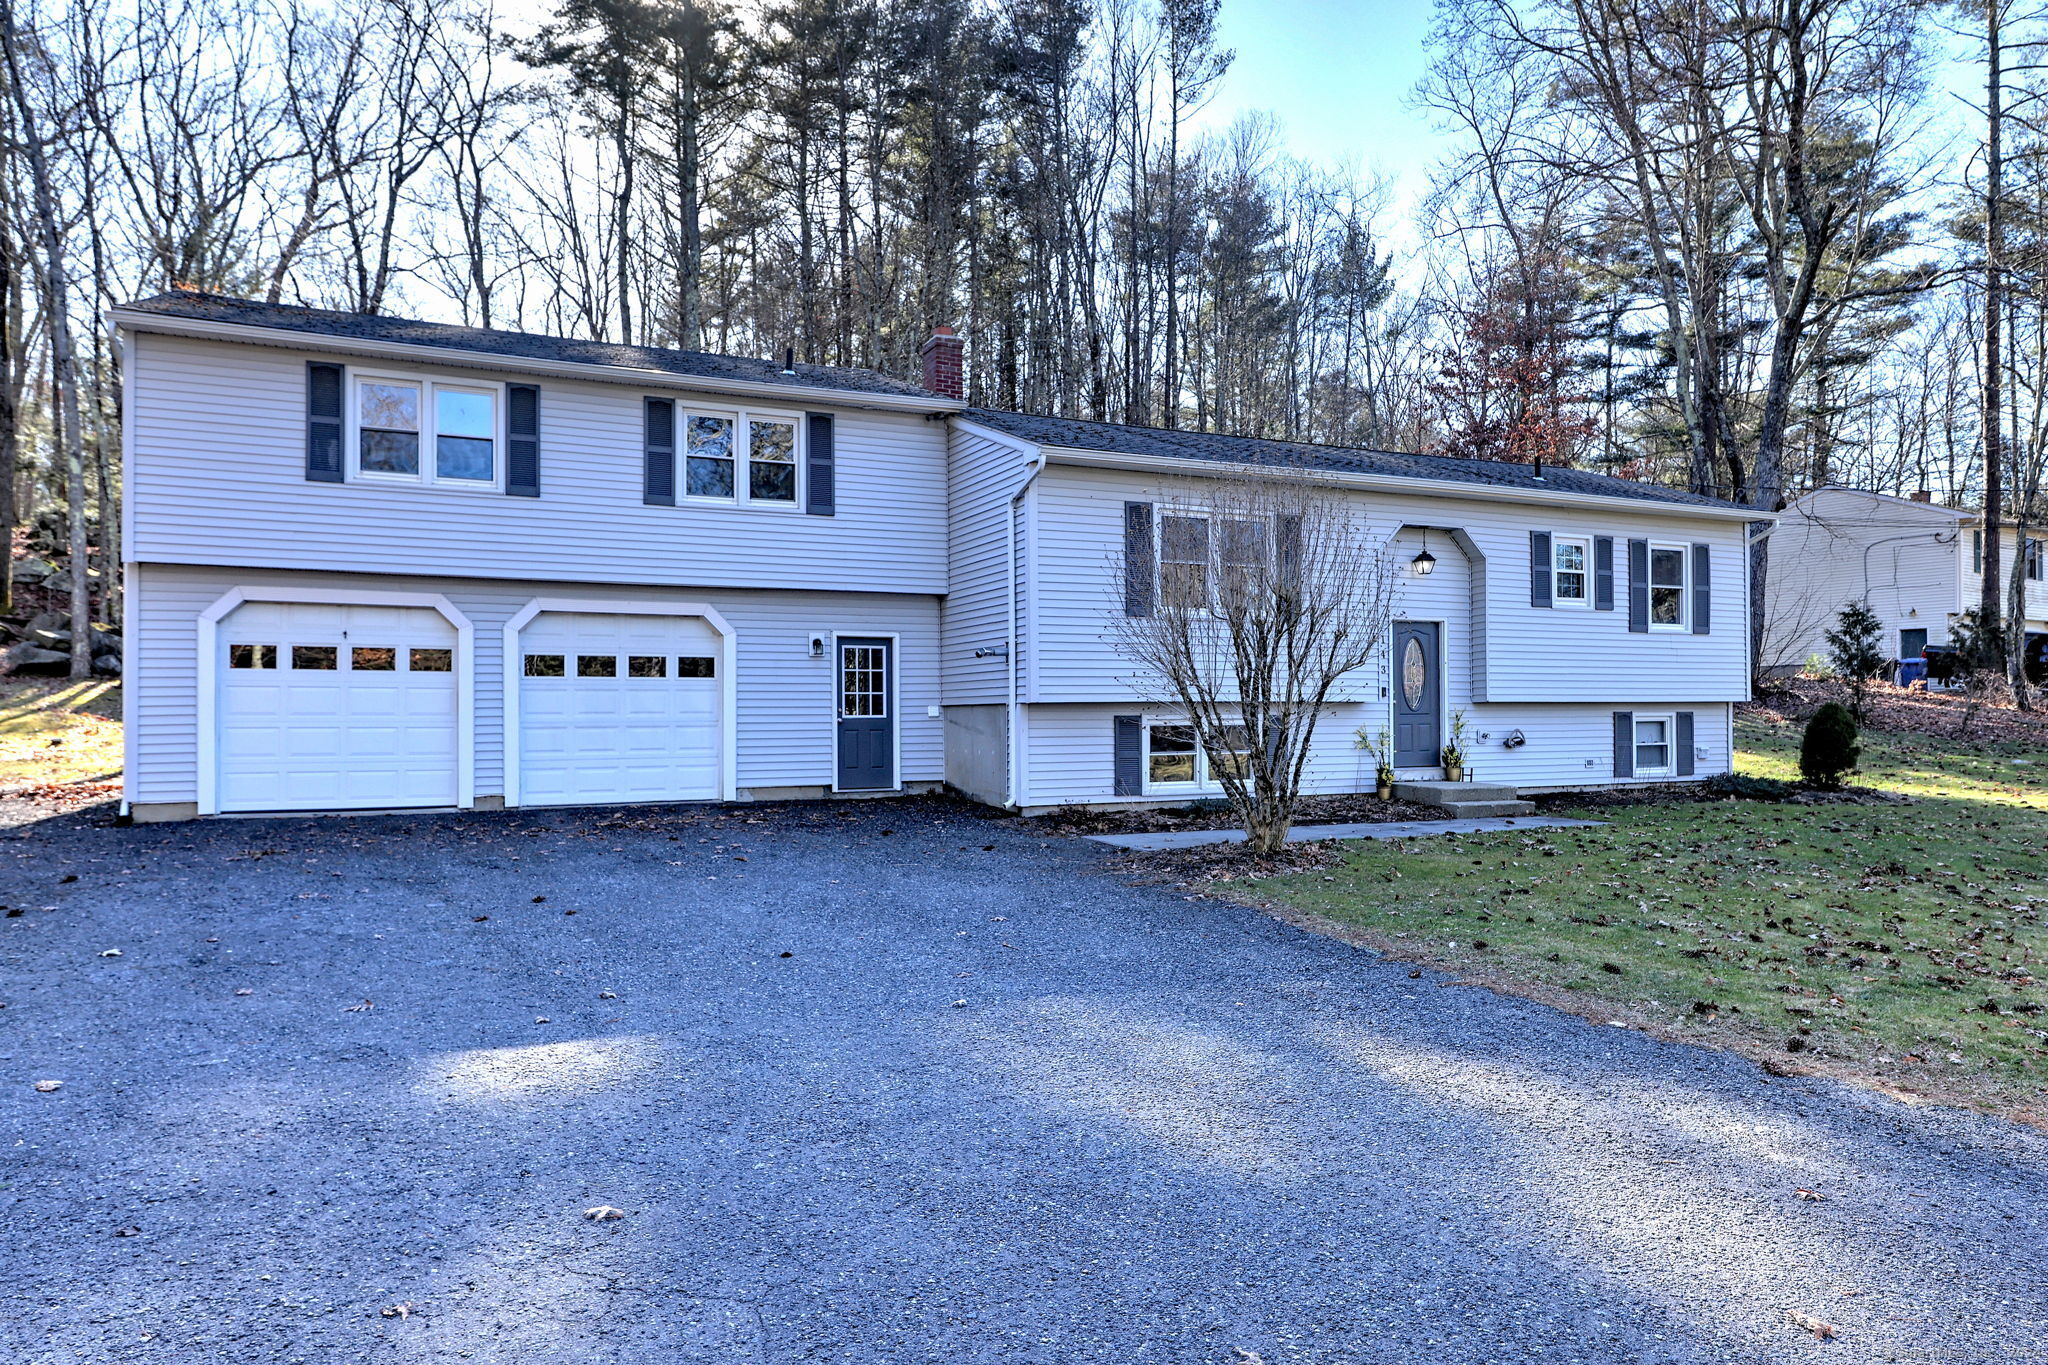 143 SPICER Road, Thompson, CT 06277